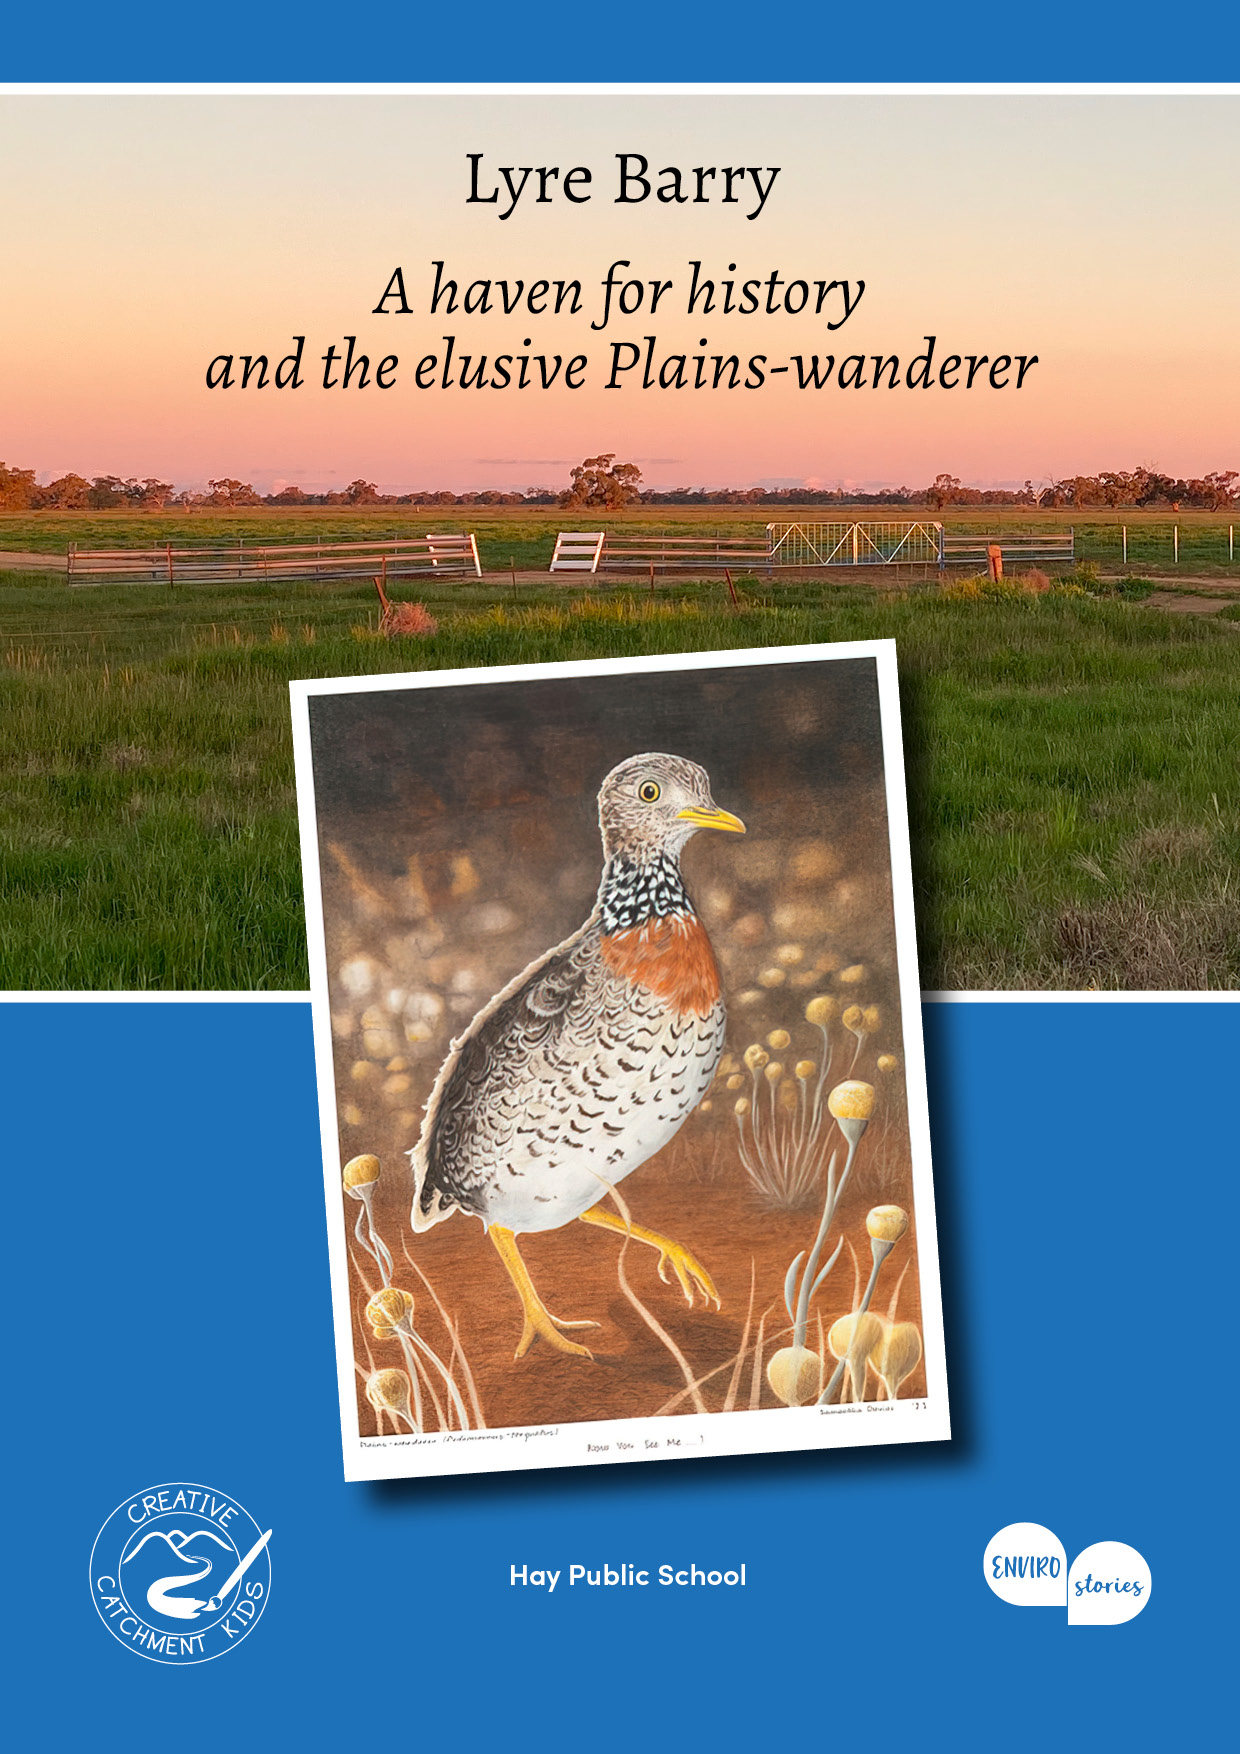 Lyre Barry – A haven for history and the elusive Plains-wanderer